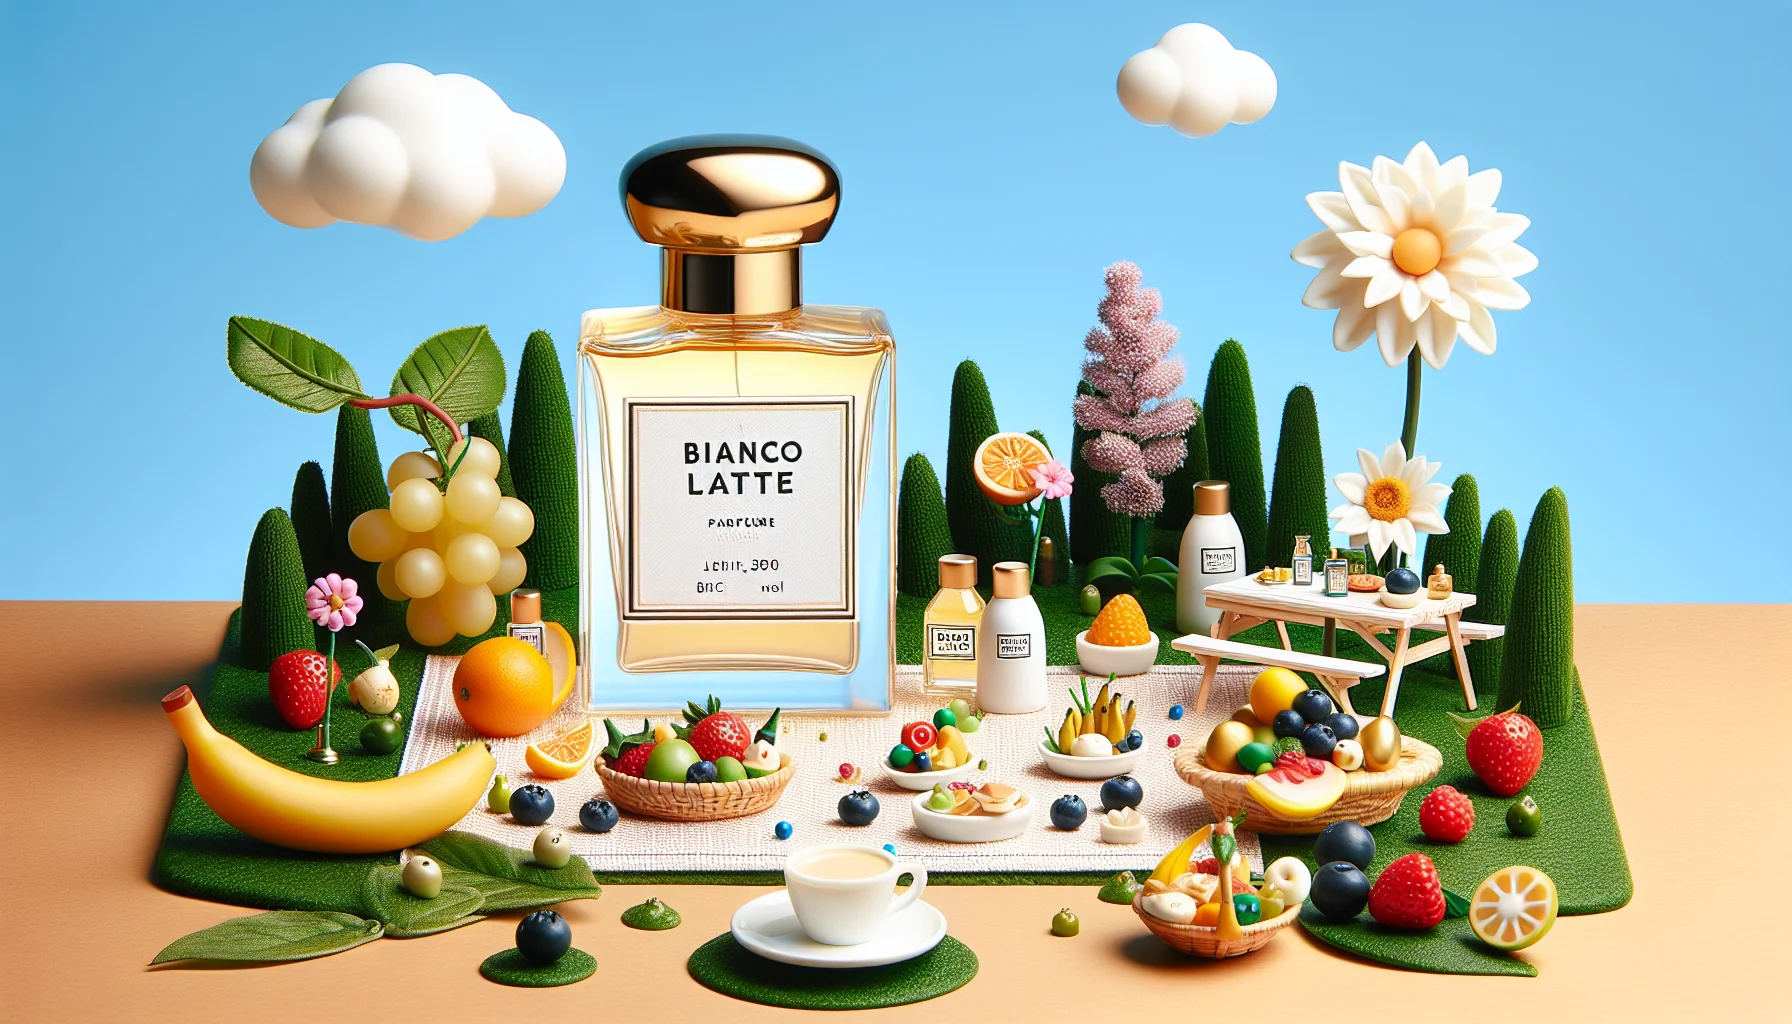 Create an engaging and humorous scene featuring a bottle of Bianco Latte perfume. In this setup, the perfume bottle could be enjoying a plush picnic in a garden, surrounded by small, delighted fruits and flowers as if they're in awe of its scent. The perfume could be occupying the middle of a tiny picnic blanket with dishes of delicacies that represents its notes, all under a clear blue sky. The overall setup should make viewers feel the perfume as an indispensable part of every fun scenario and suggest its captivating fragrance.